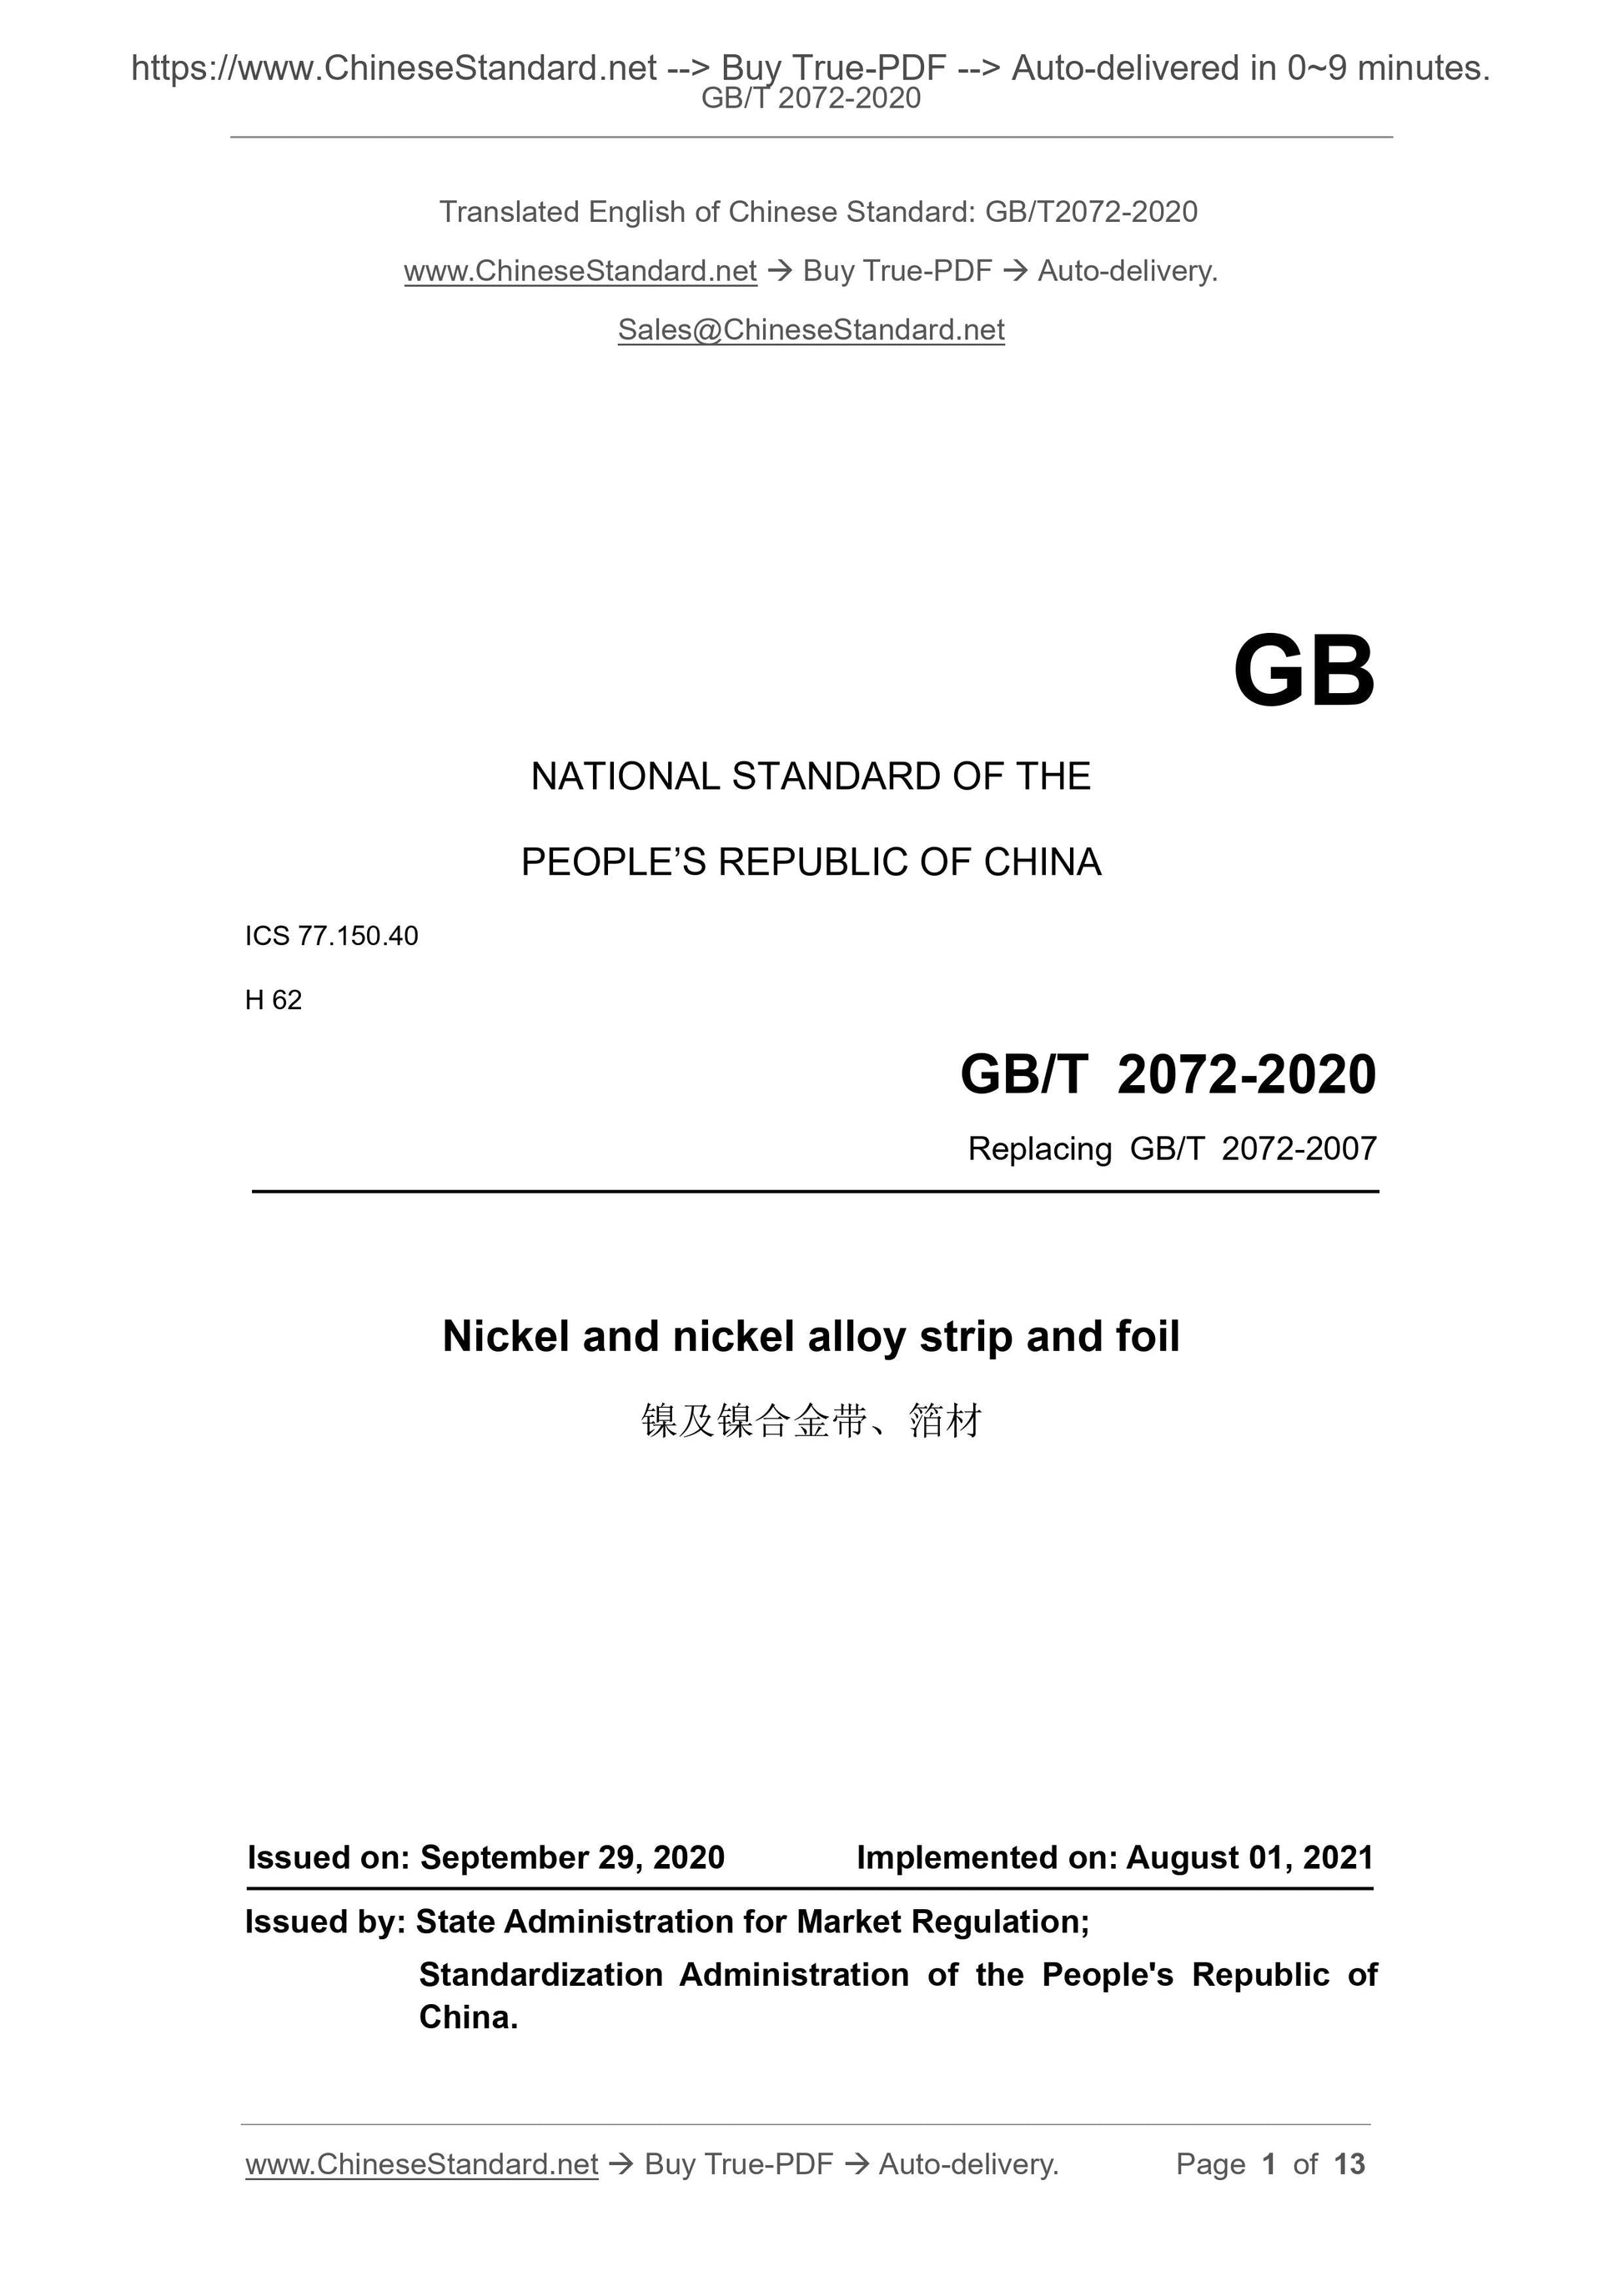 GB/T 2072-2020 Page 1